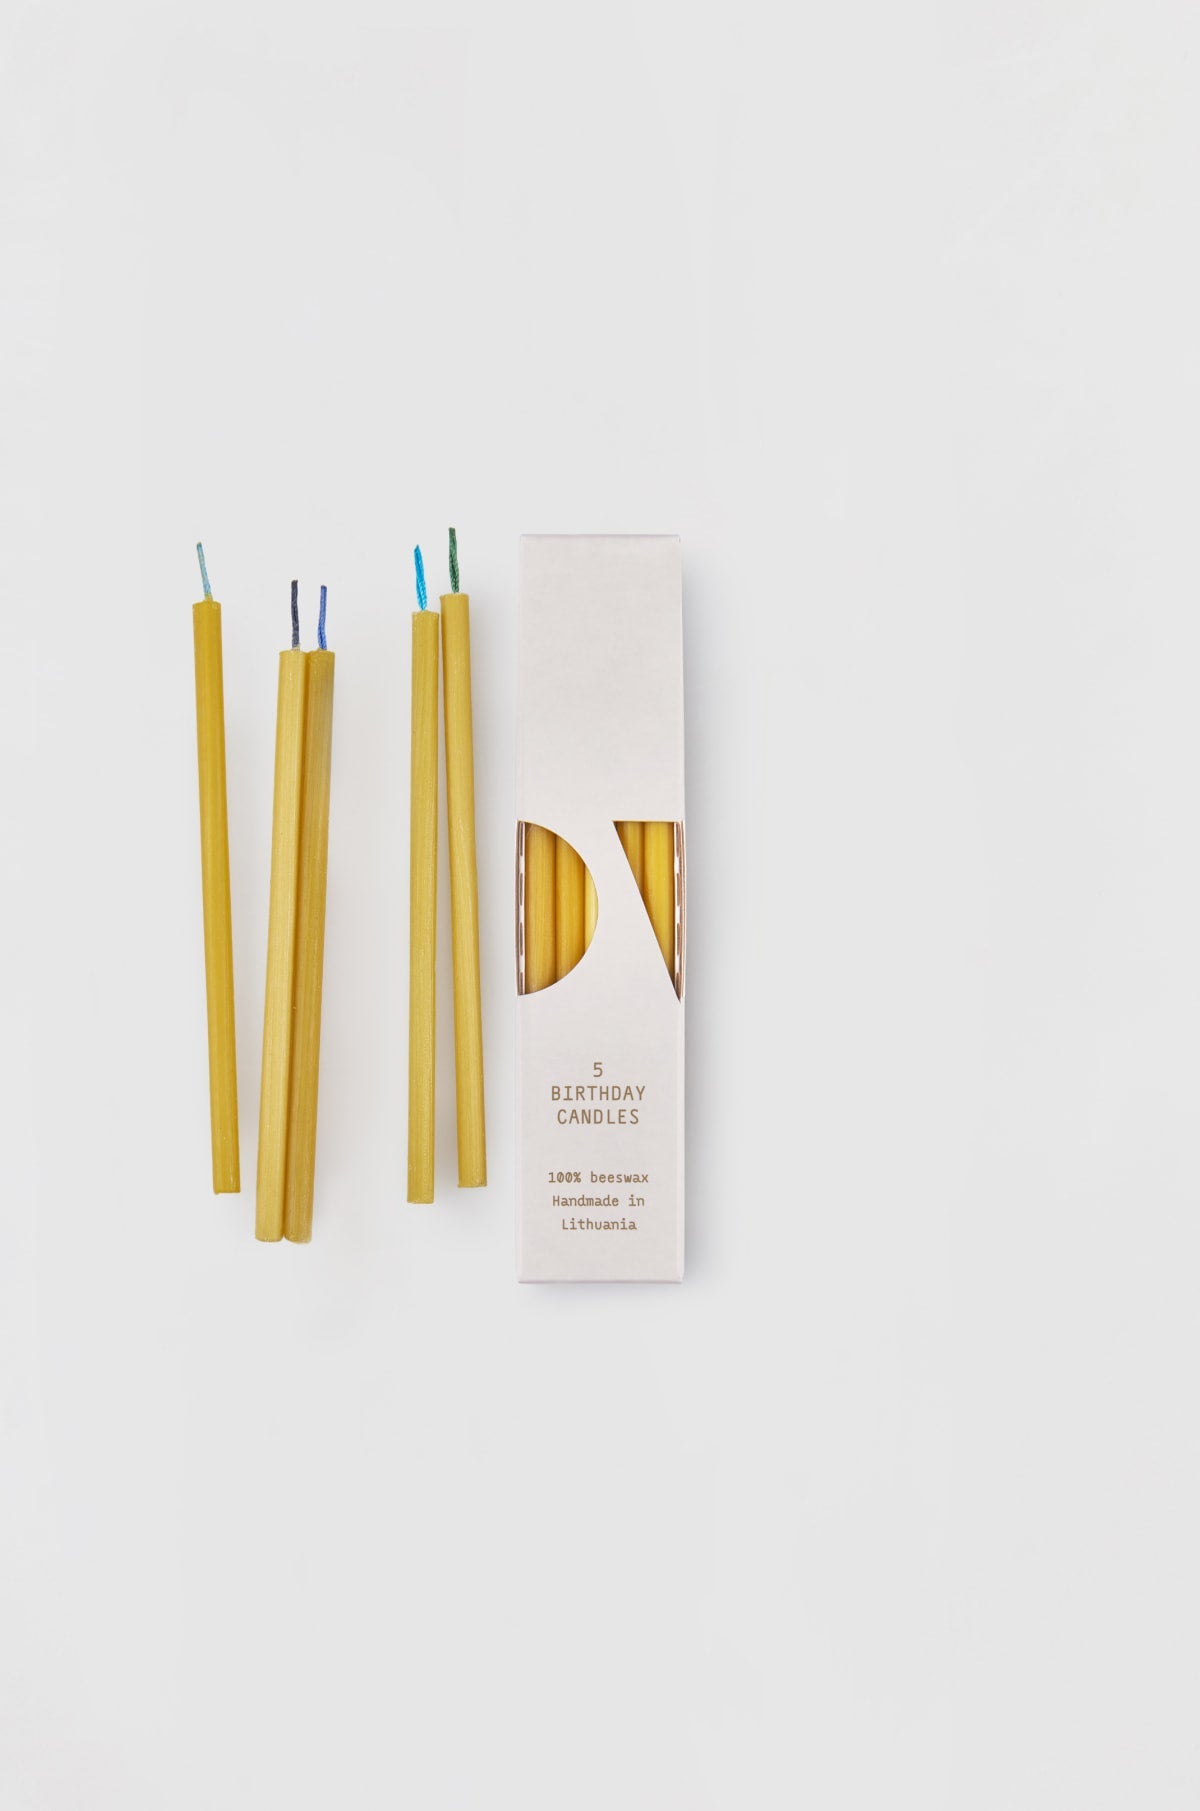 NATURAL BEESWAX BIRTHDAY CANDLES - 5 PACK